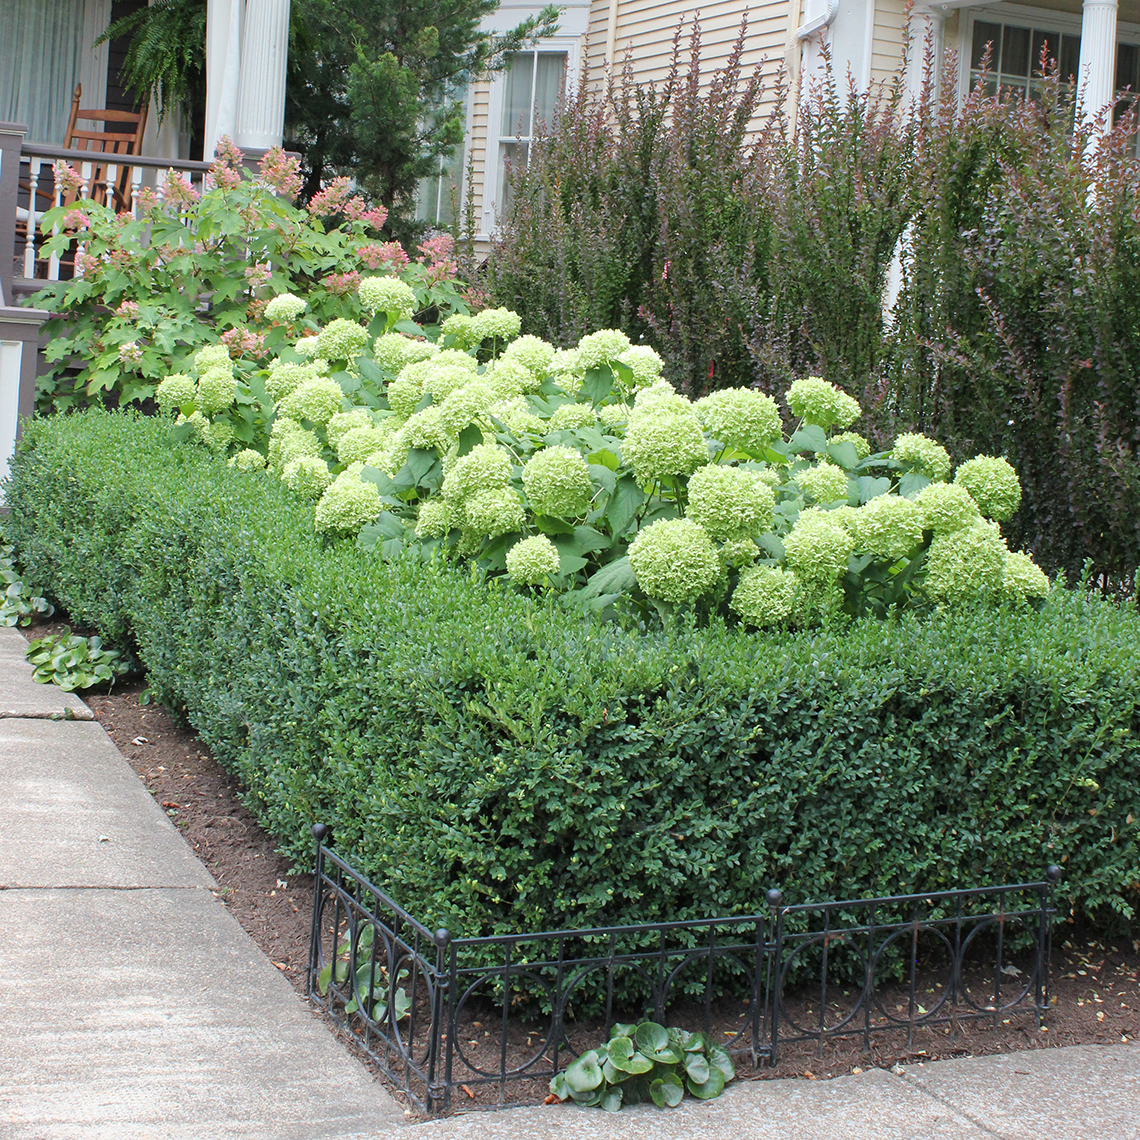 Annabelle hydrangea surrounded by boxwood which is holding up the floppy stems